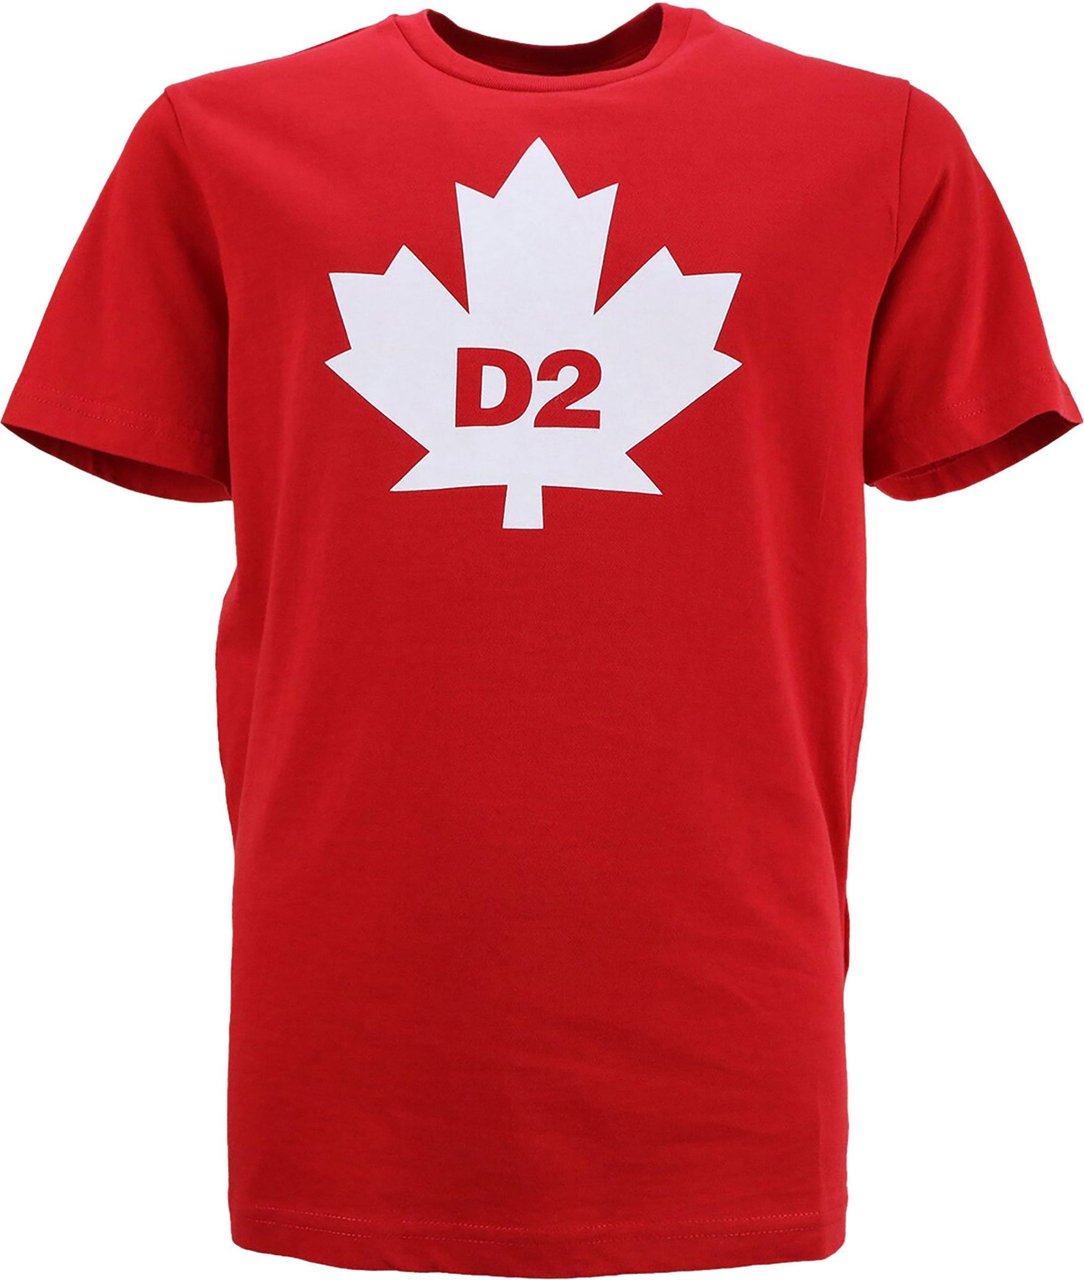 Dsquared2 shirt rood dq0992 relax fit Rood